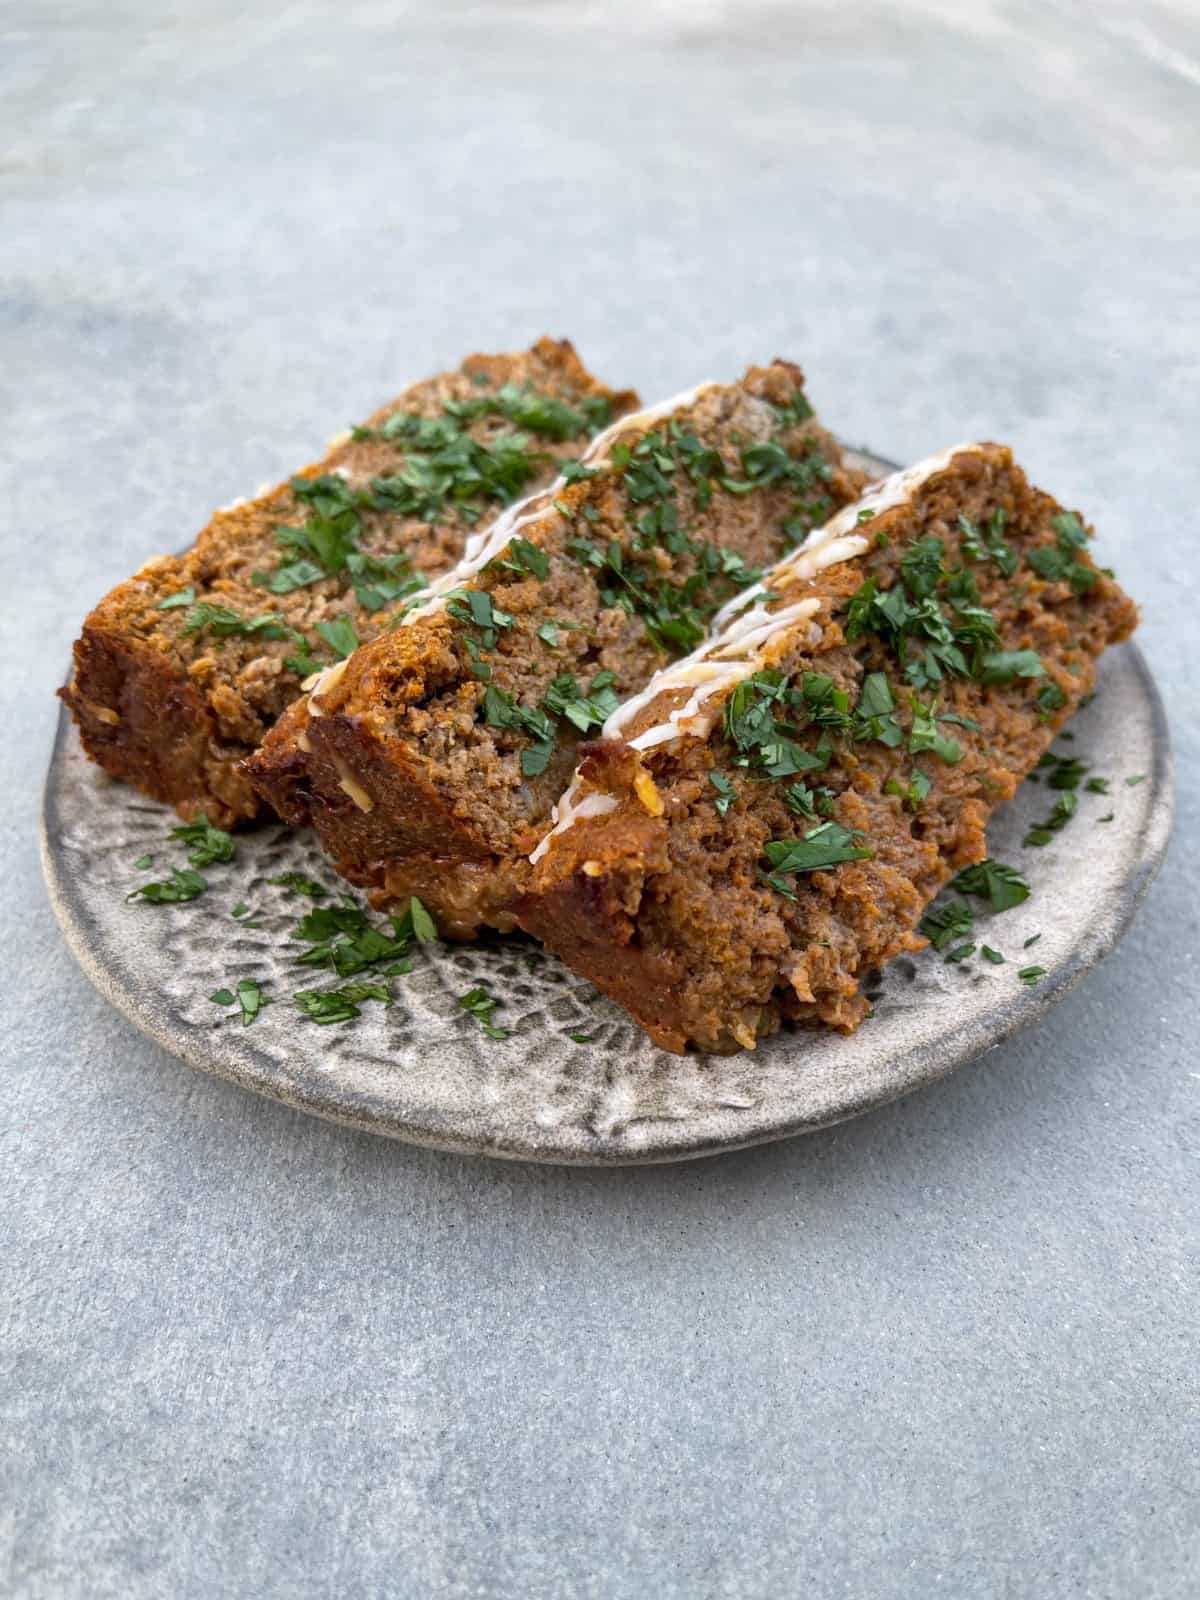 Textured Pottery Plate with 3 slices of meatloaf garnished with parsley.